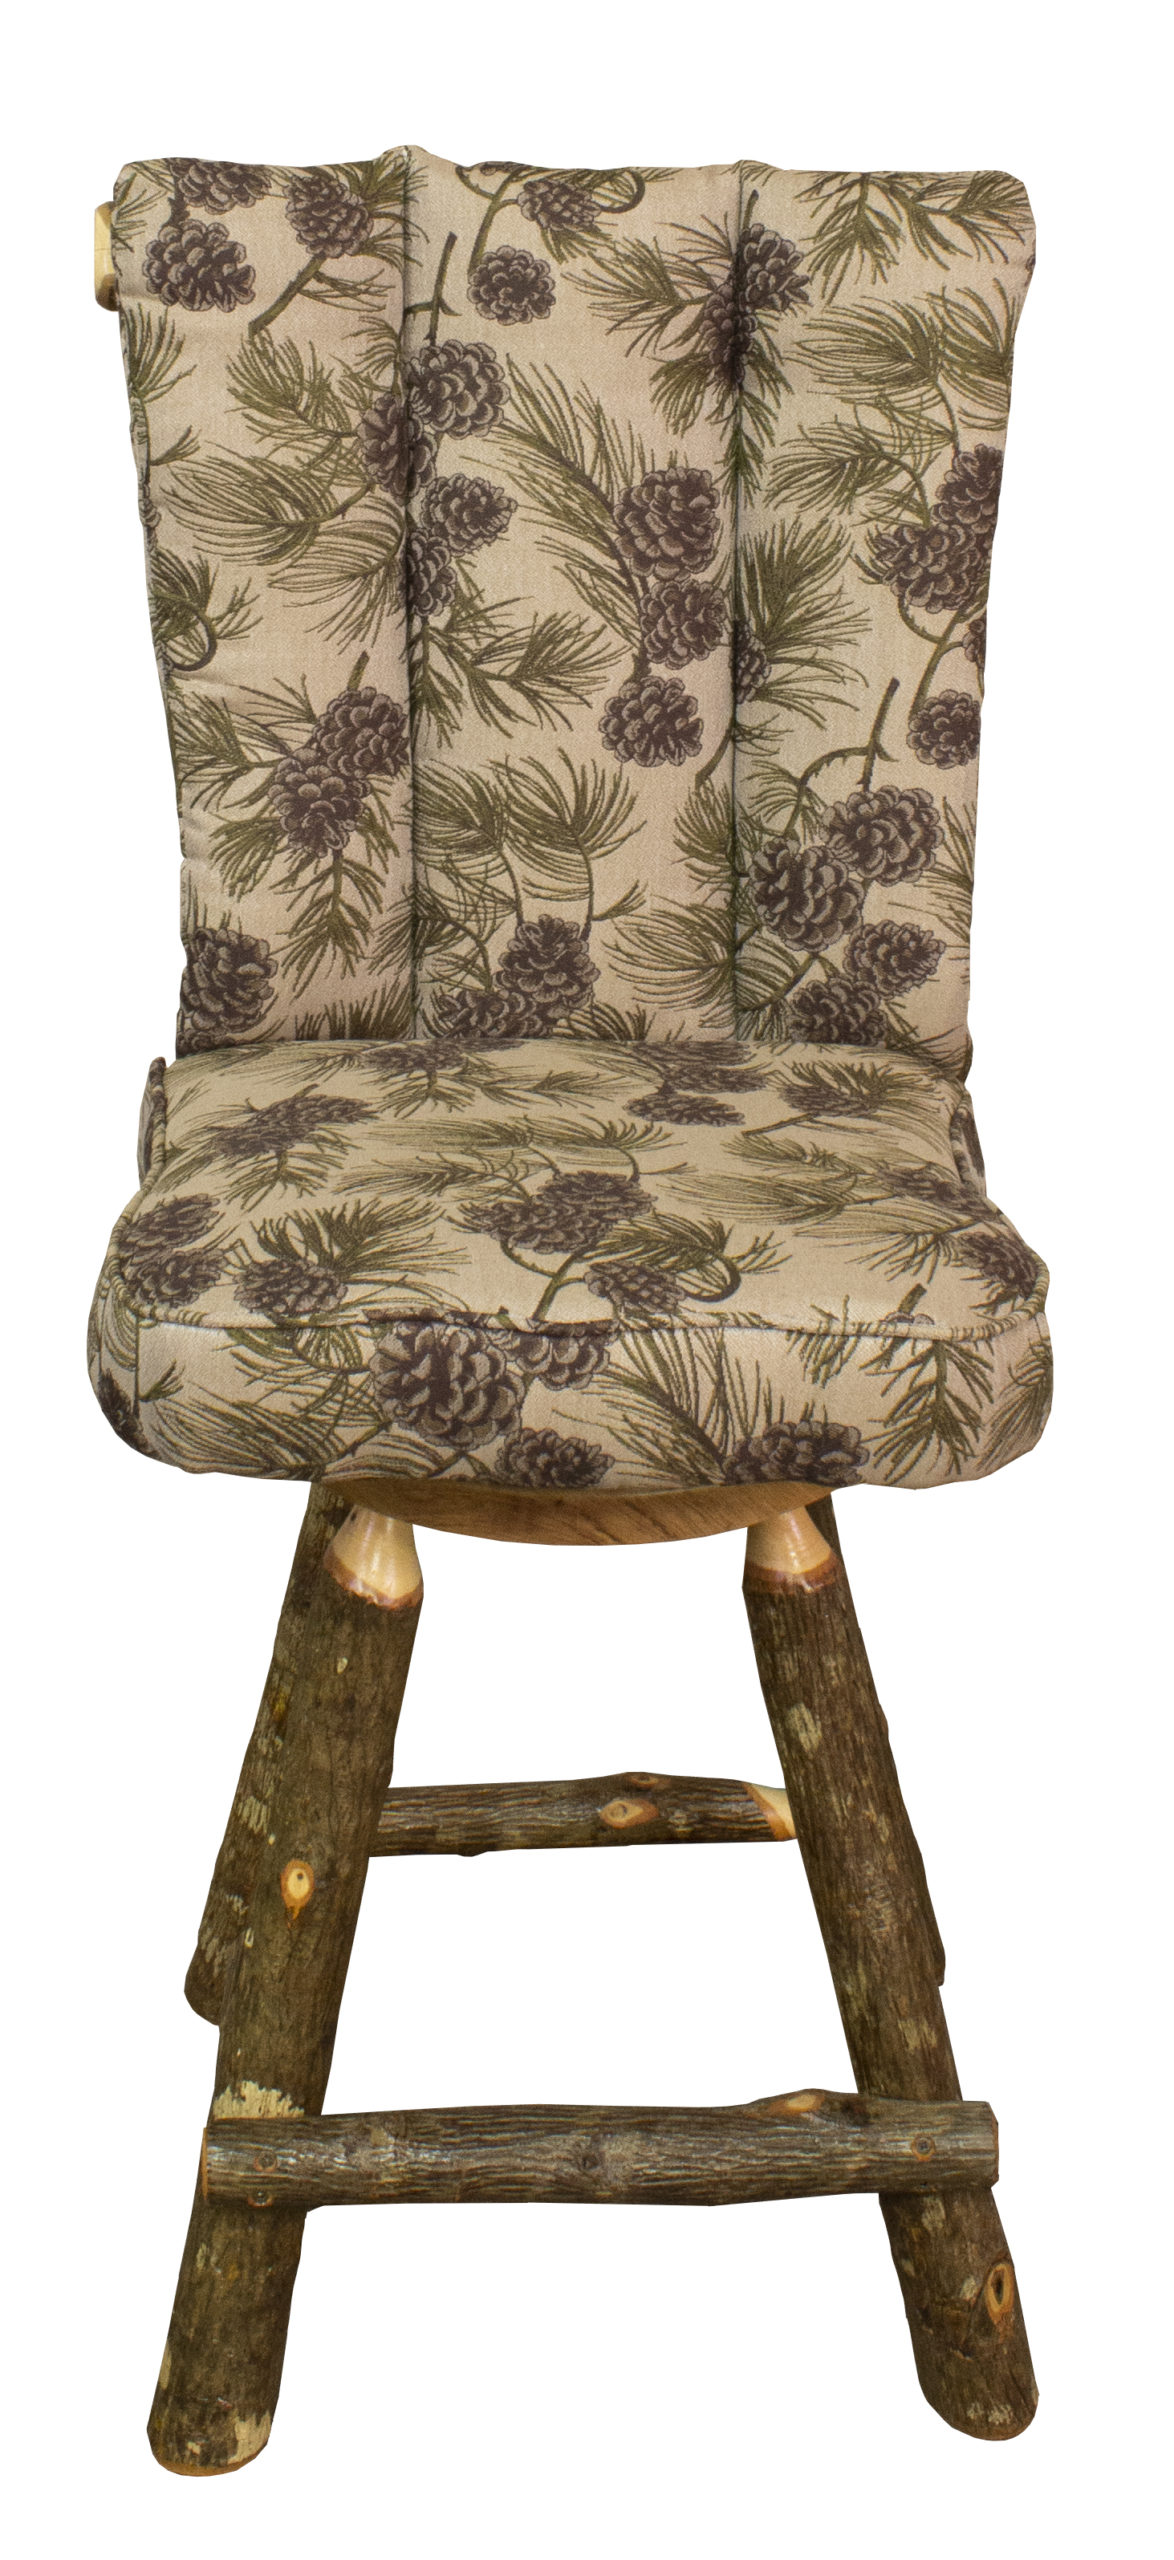 Pinecone upholstered stool